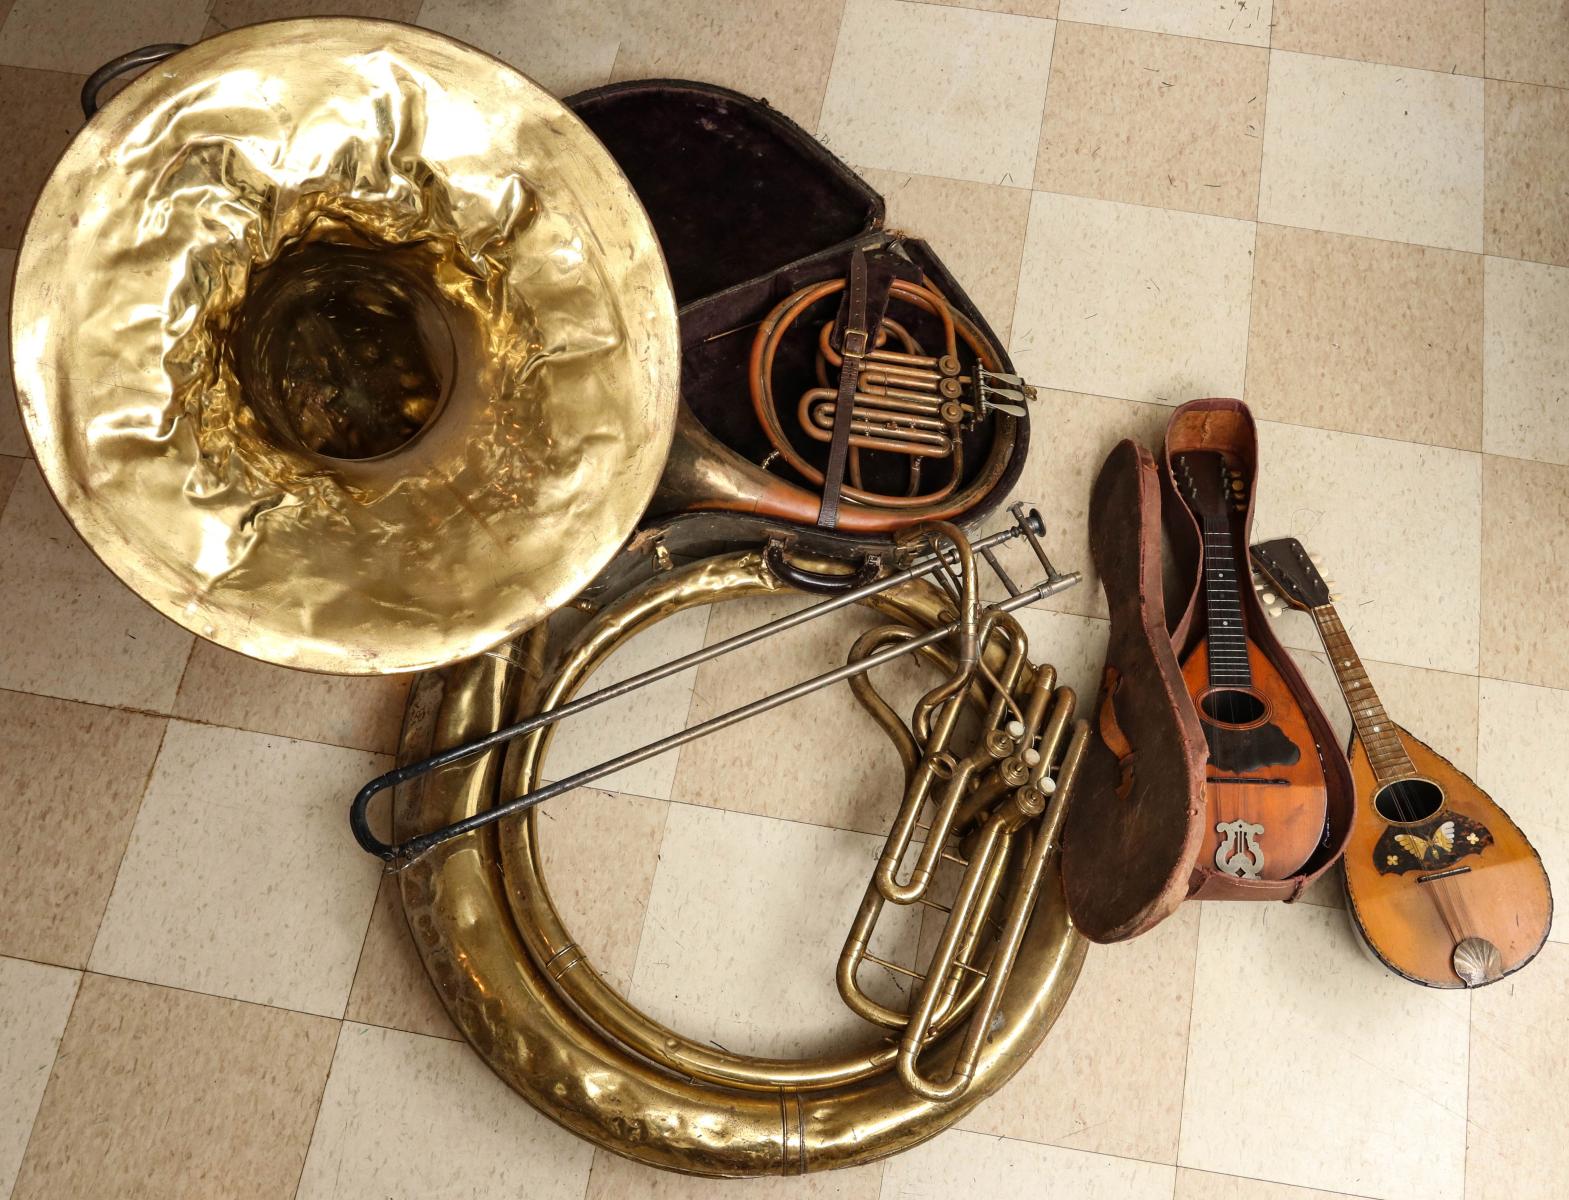 ANTIQUE SOUSAPHONE, FRENCH HORN, INLAID MANDOLINS